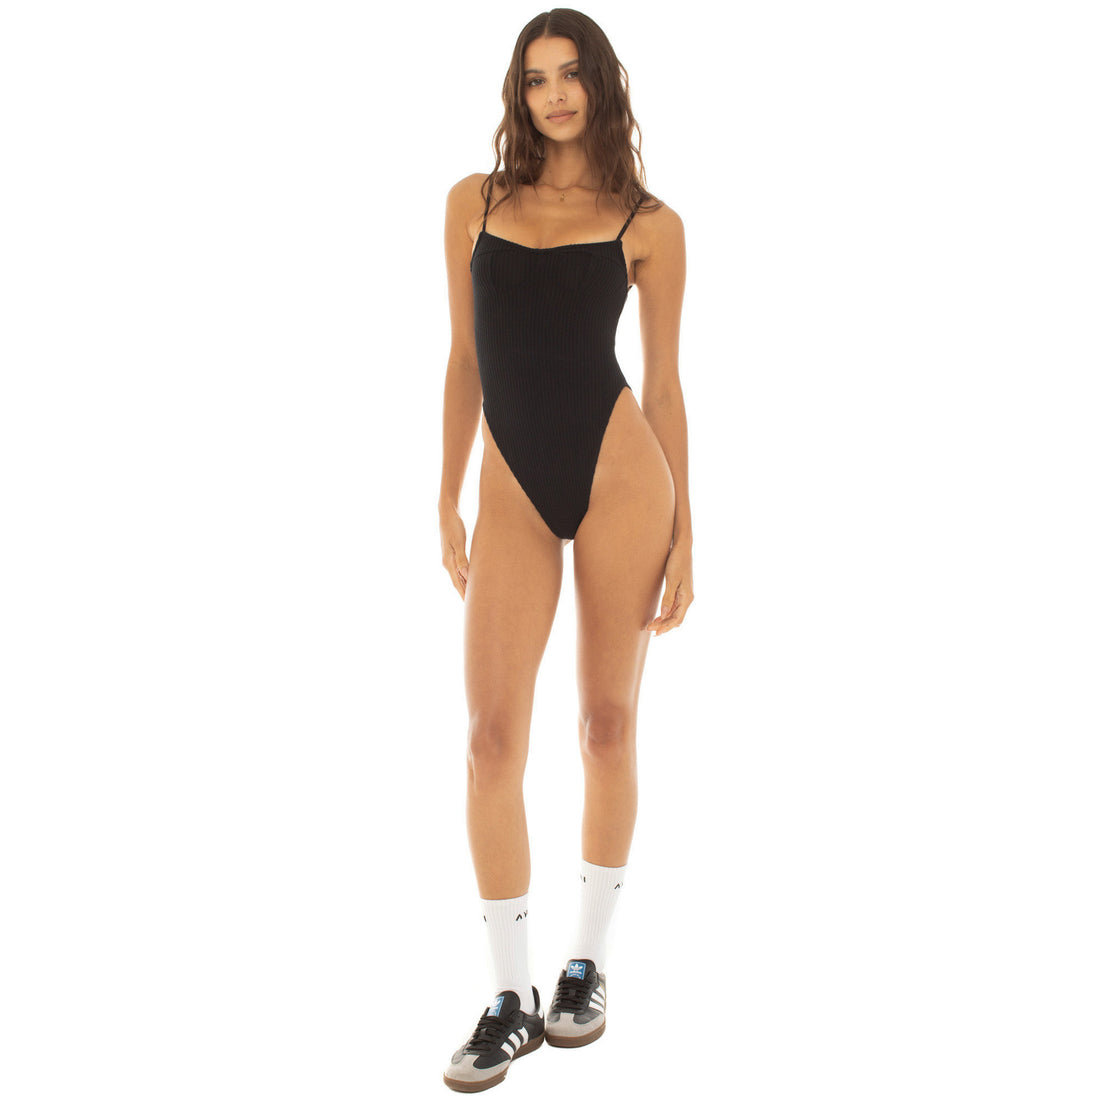 Are You Am I - Kaat Bodysuit **black